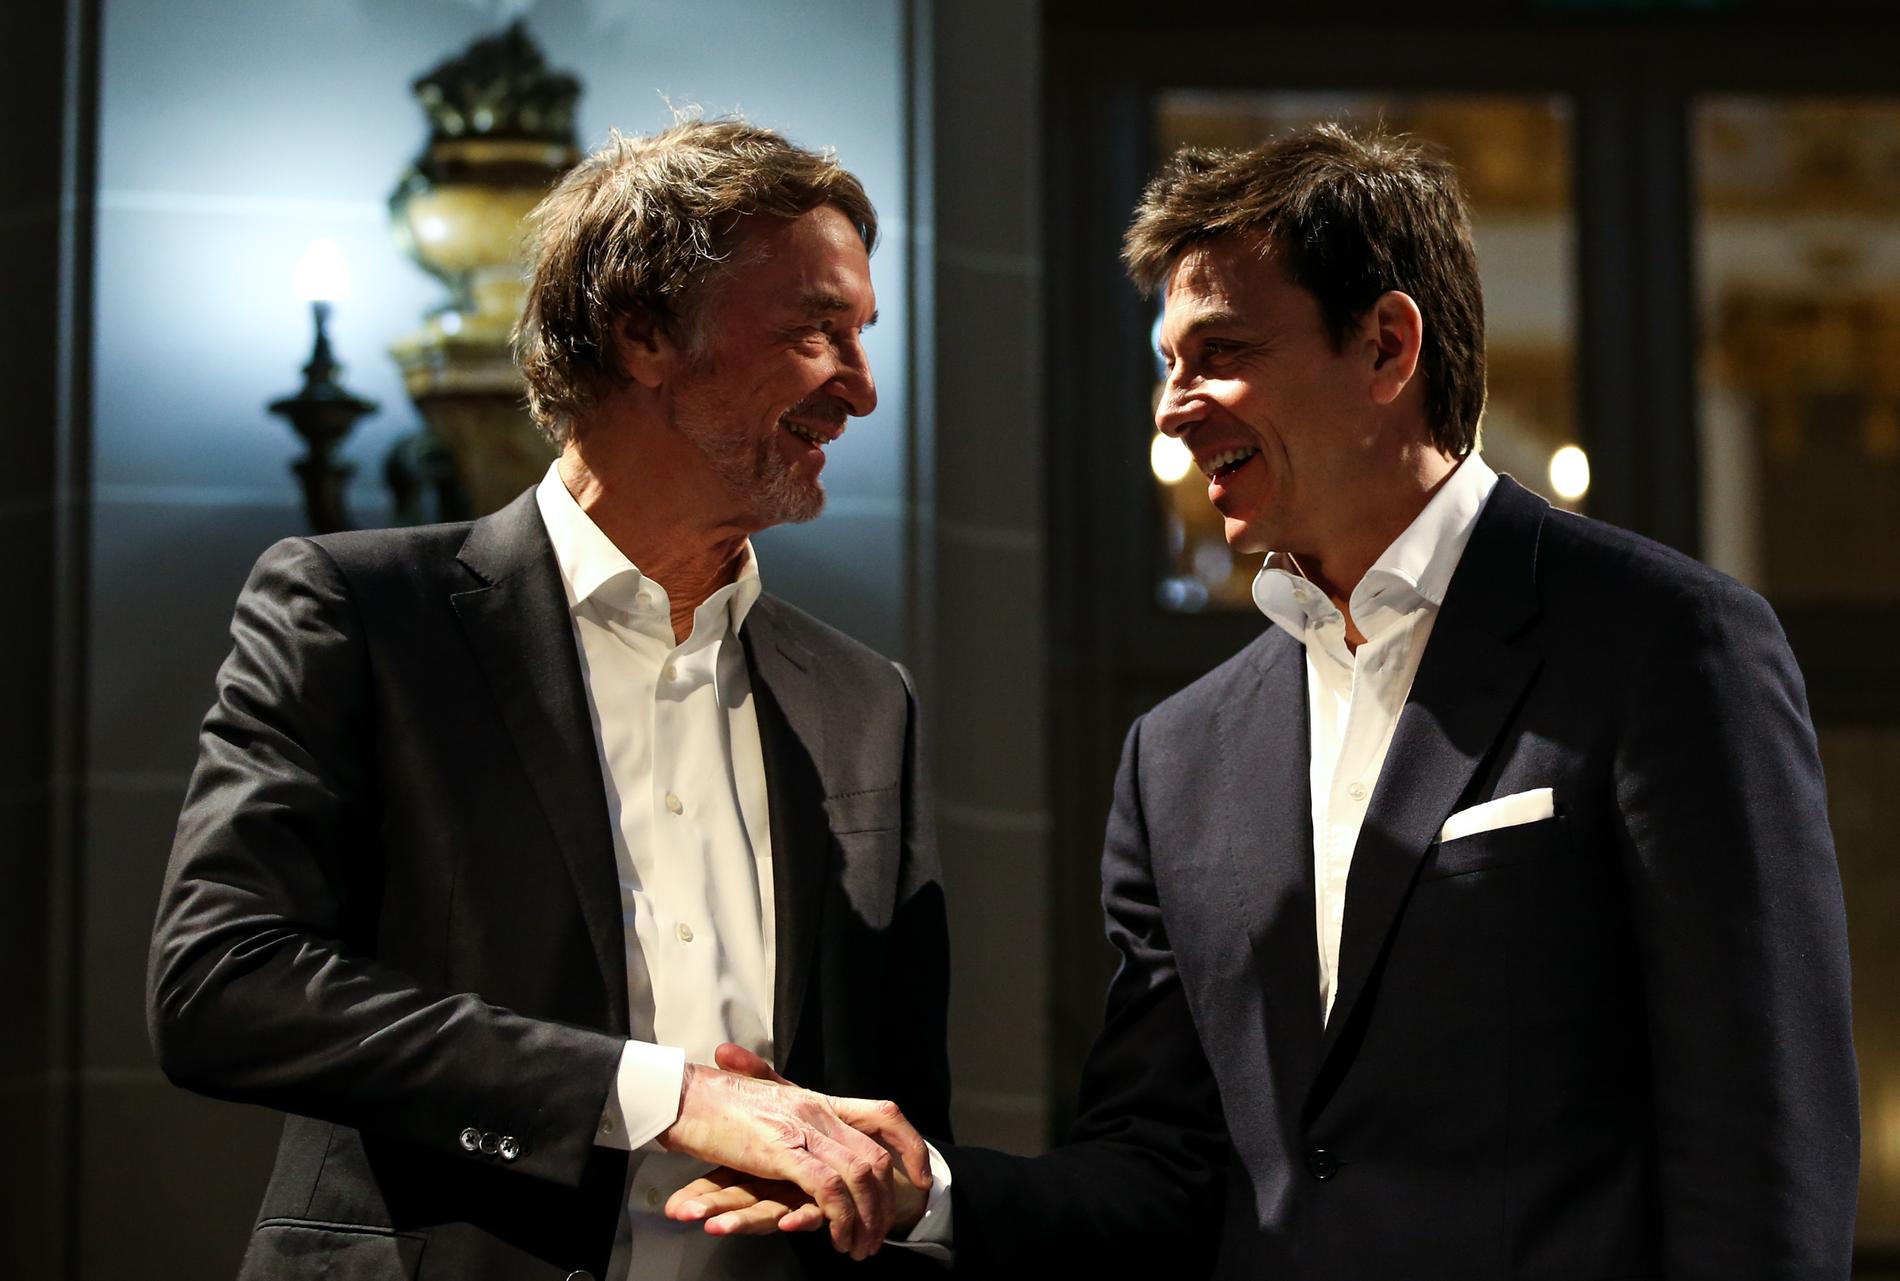 Buddies: Toto Wolff and Manchester United investor Jim Ratcliffe are both major owners of the Mercedes Formula 1 team.